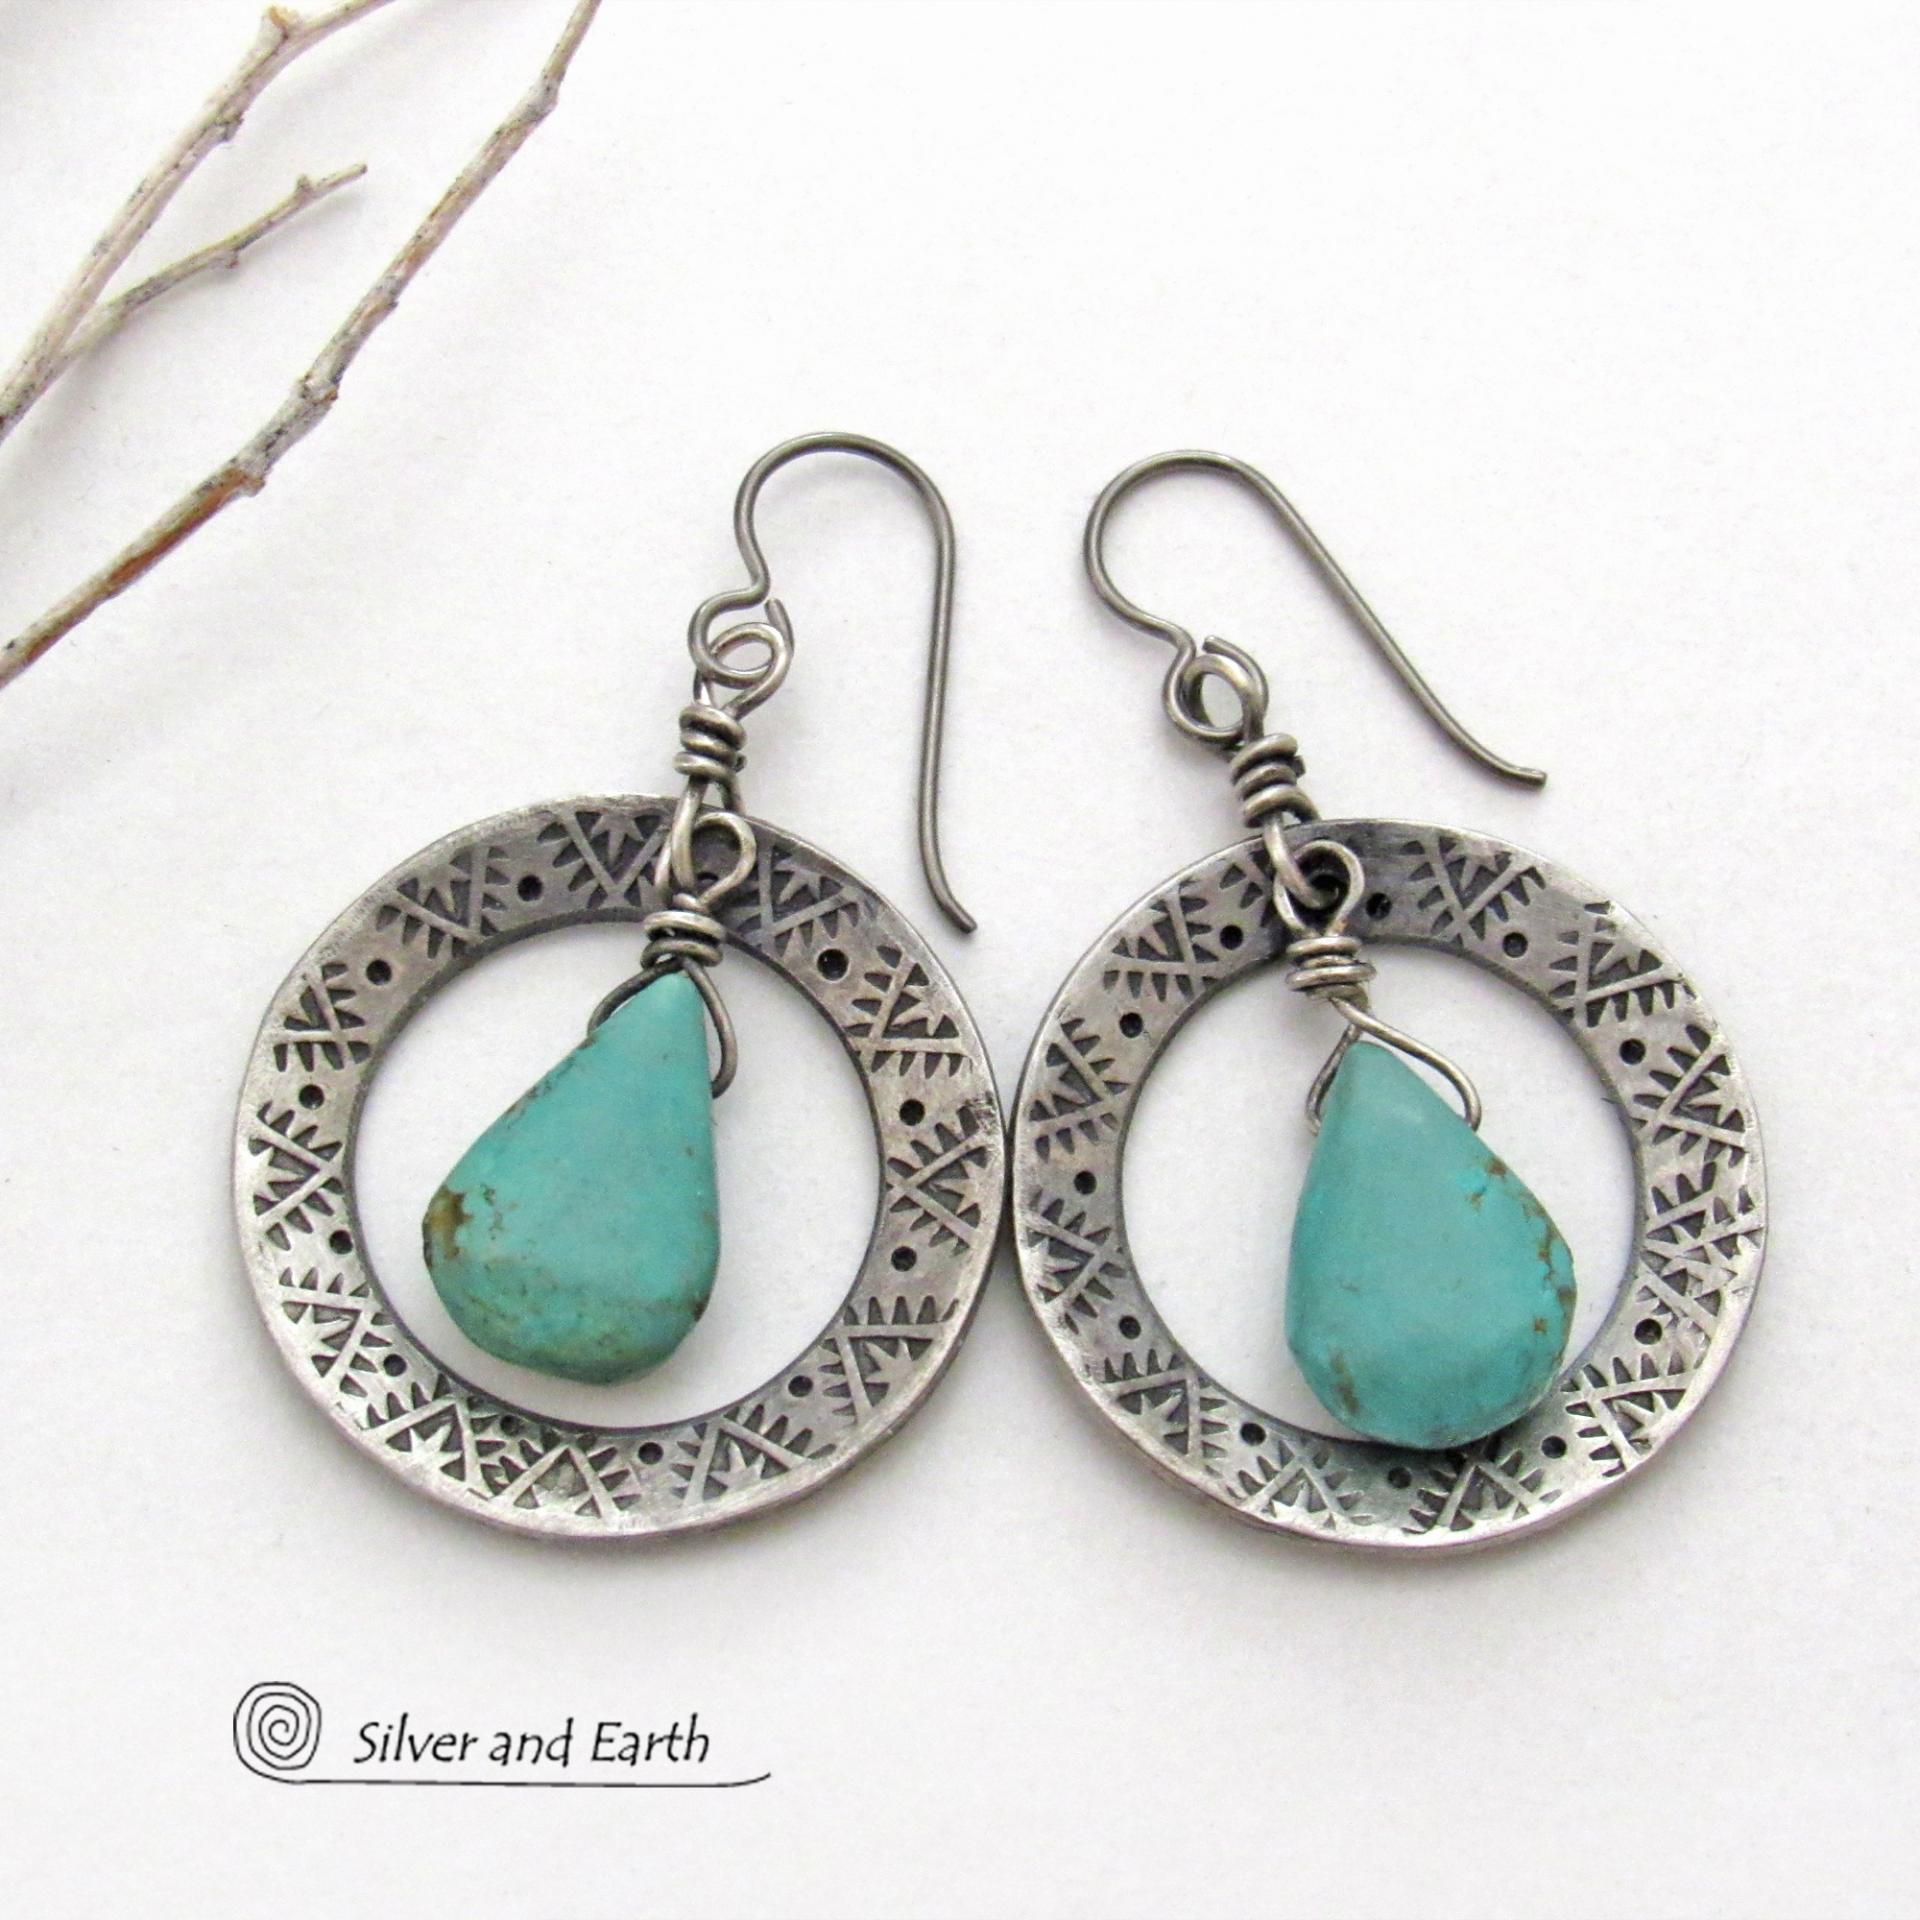 Hand Stamped Silver Pewter Hoop Earrings with Natural Turquoise Stones - Artisan Handcrafted Western Chic Southwest Style Jewelry